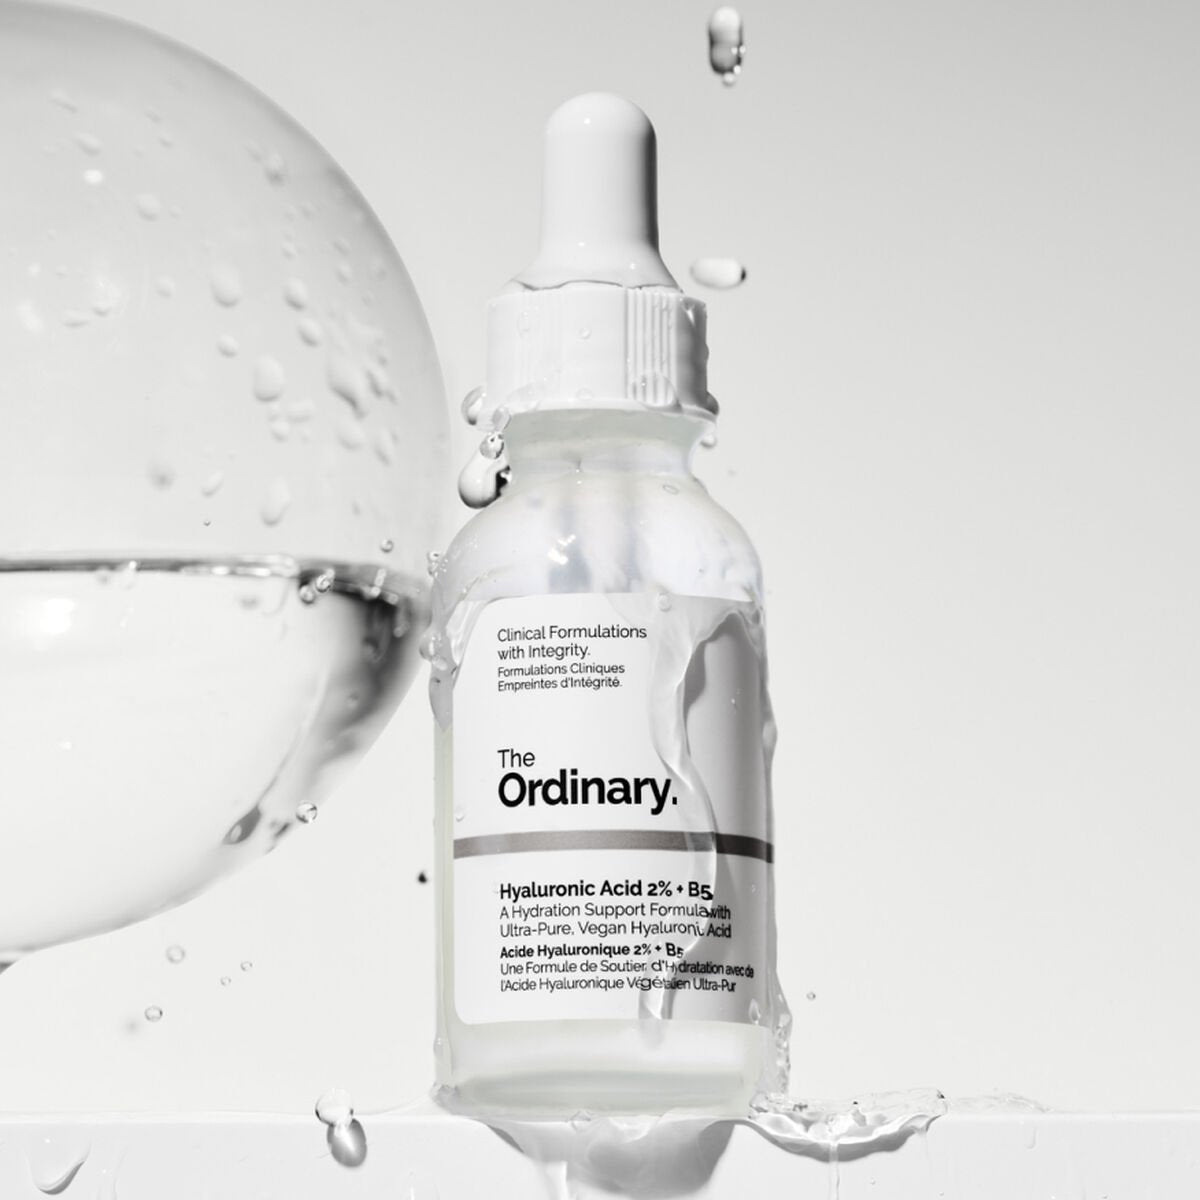 The Ordinary Hyaluronic Acid 2% + B5 30ml for hydration, improves skin texture, for smooth and soft skin